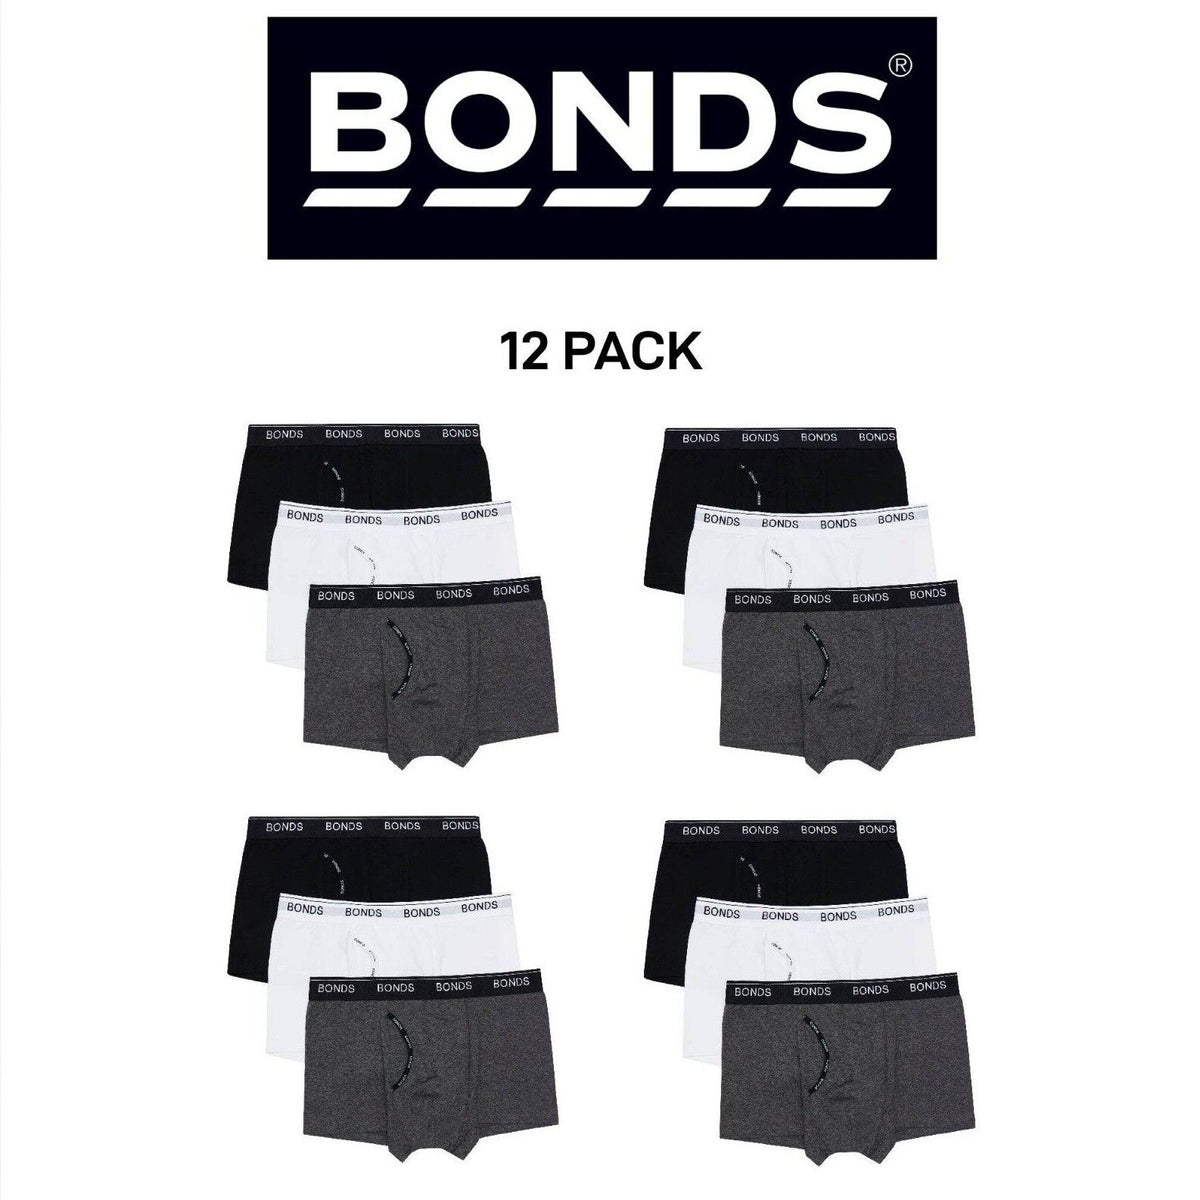 Bonds Mens Guyfront Trunk Stretchy Cotton Seam free Sides Elastic 12 Pack MZ963A